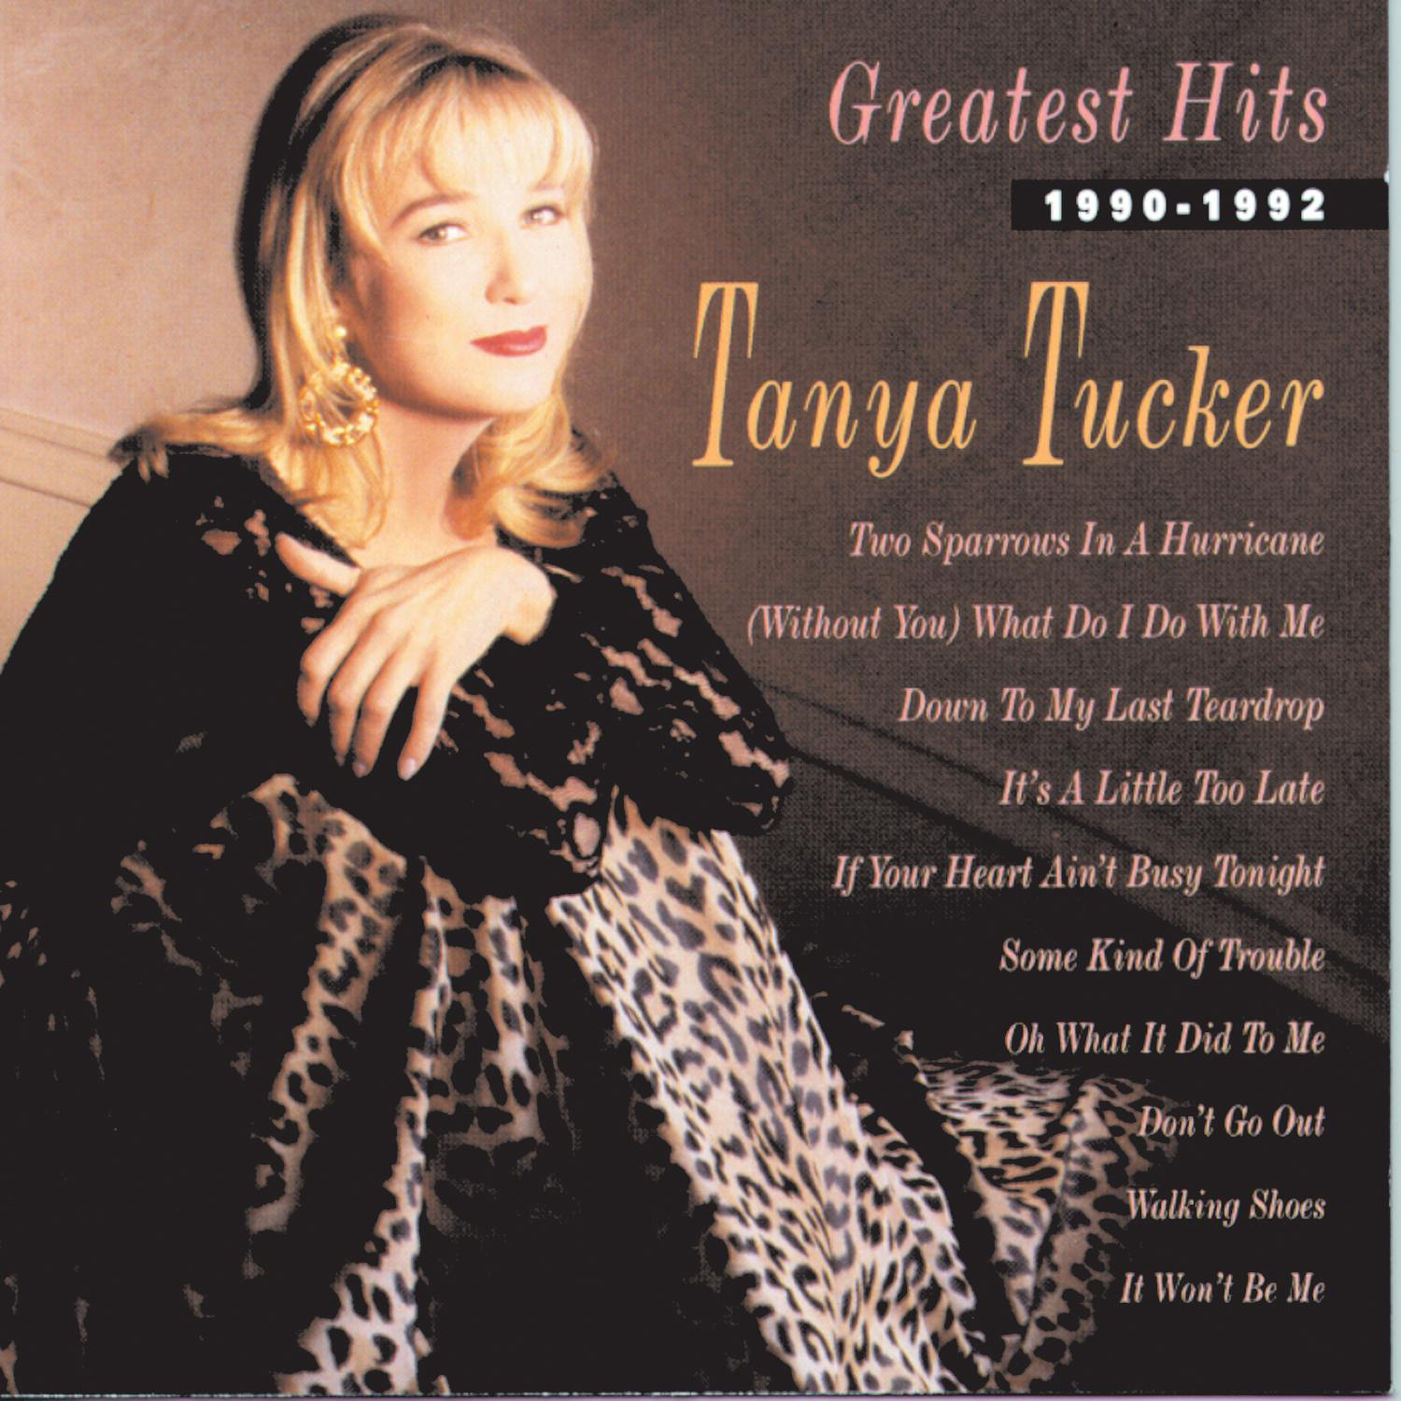 Art for It's A Little Too Late by Tanya Tucker